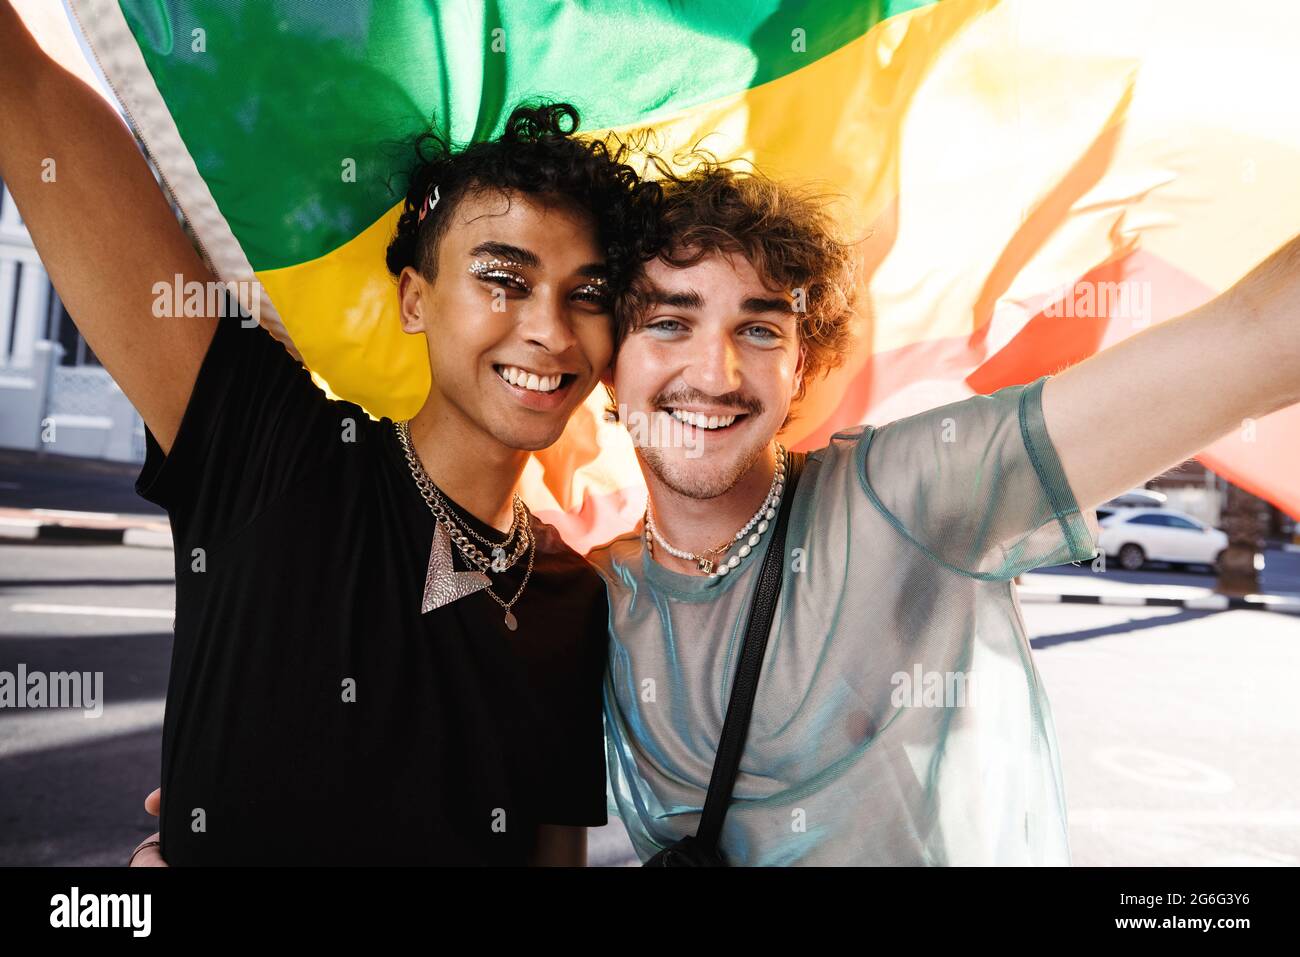 Two young queer men celebrating gay pride. Two young gay men smiling cheerfully while raising a rainbow flag at a gay pride parade. Two members of the Stock Photo